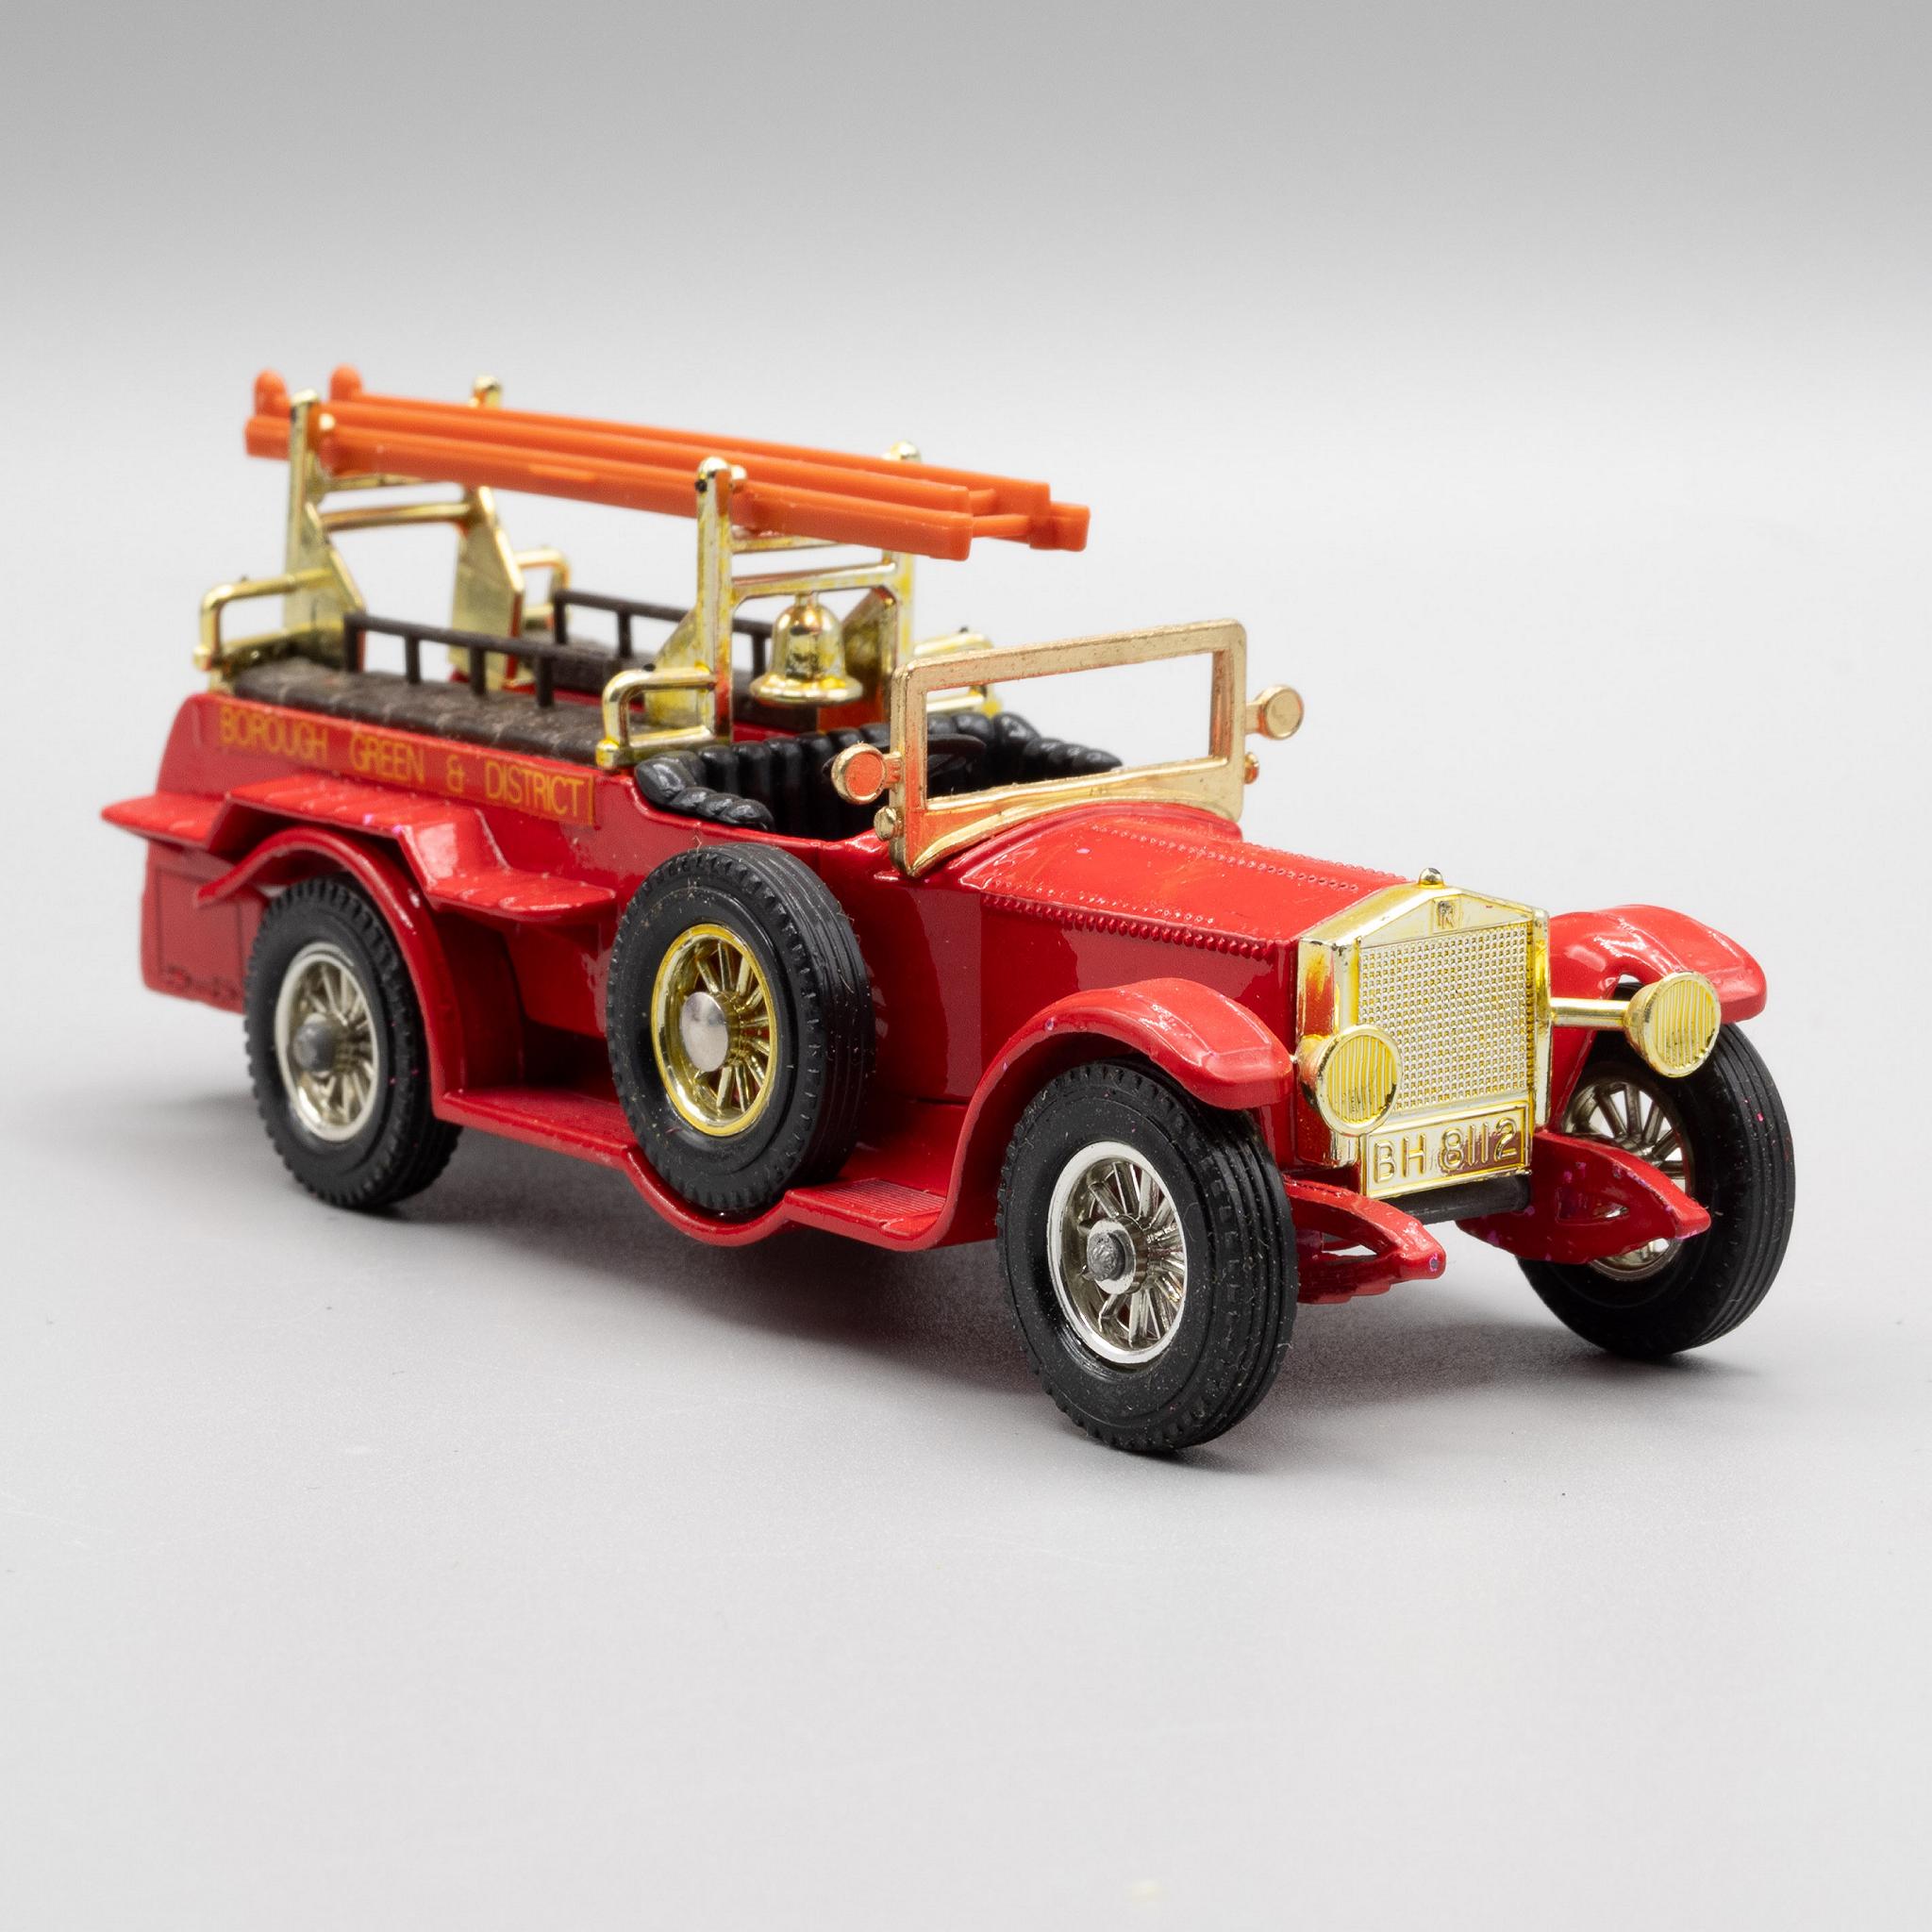 Matchbox+Models+of+Yesteryear+Y6--4-13+1920+Rolls+Royce+Fire+Engine picture 1